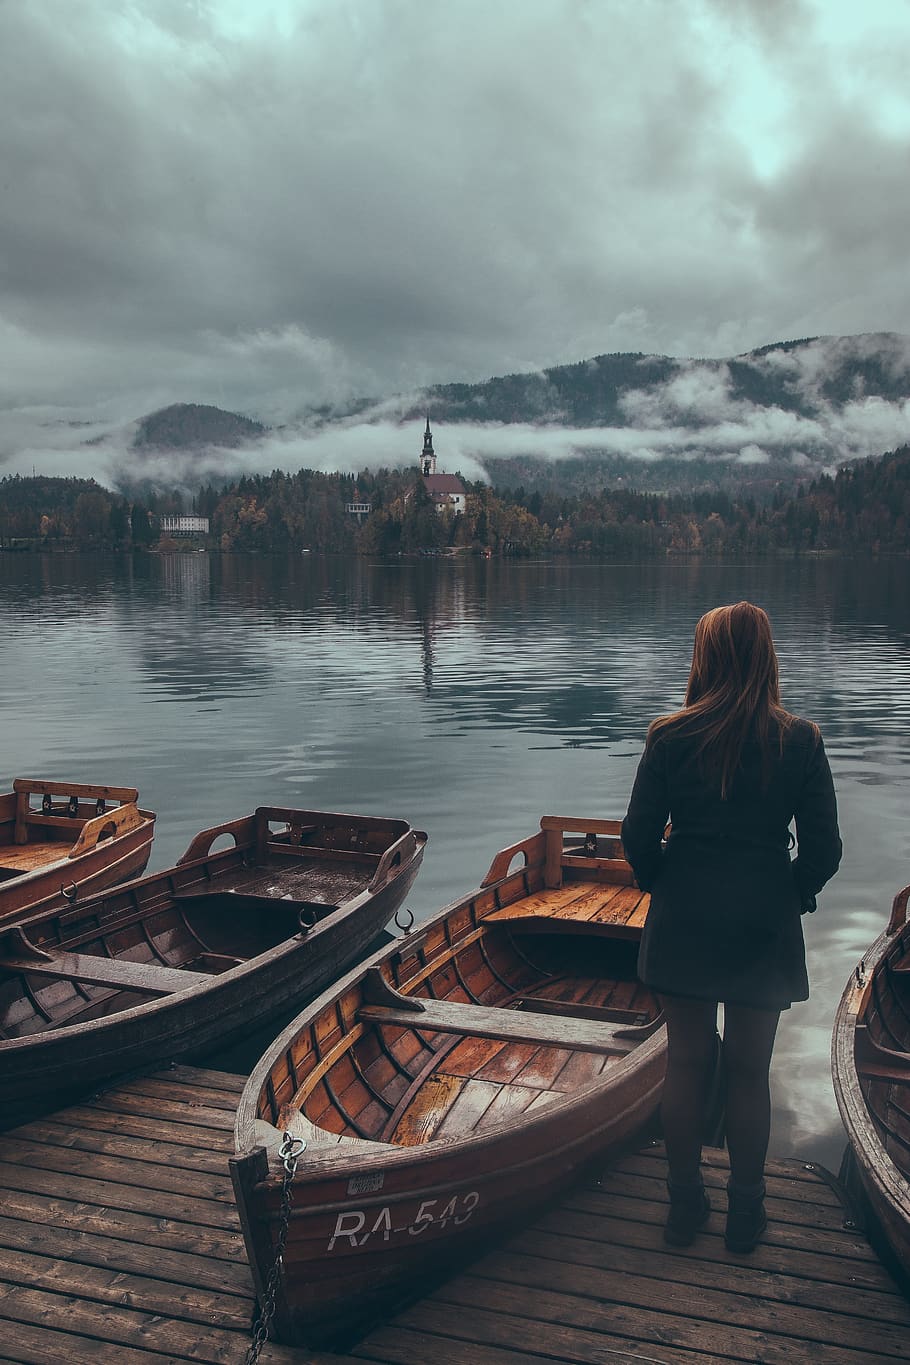 woman standing by the wooden boats at the lake under grey cloudy sky, HD wallpaper